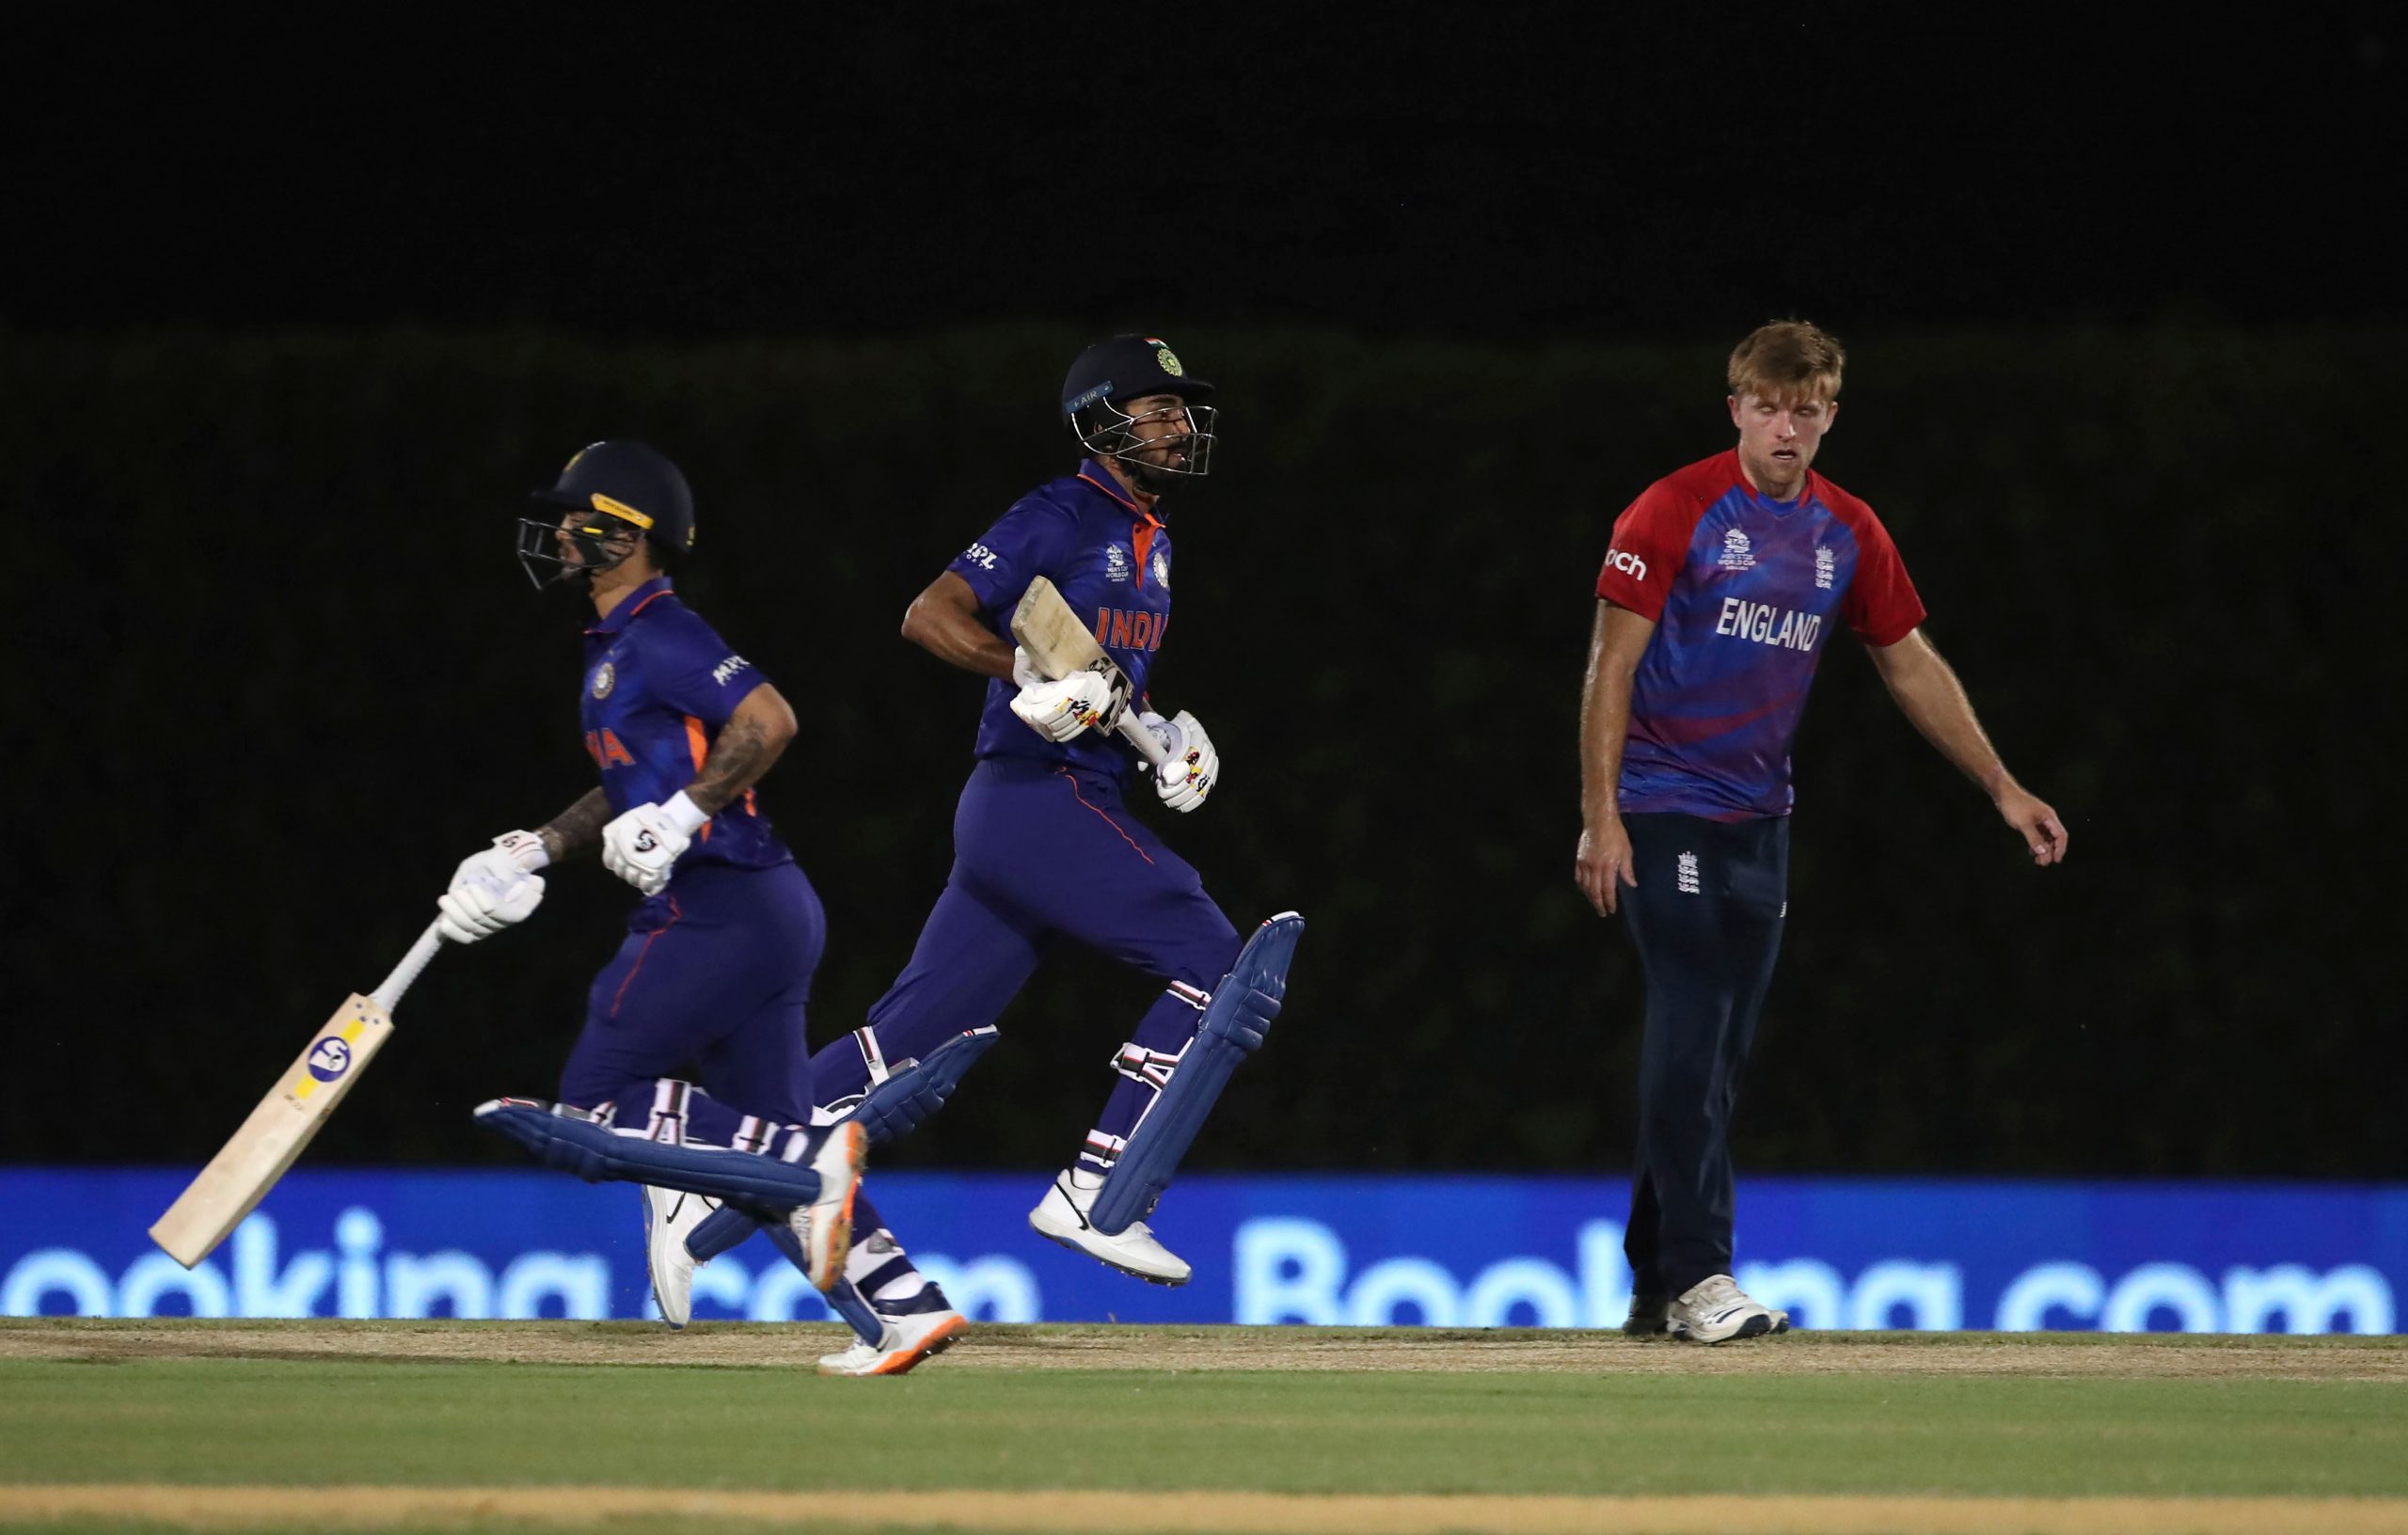 T20 World Cup 2021: Key takeaways from India’s first warm-up game vs England